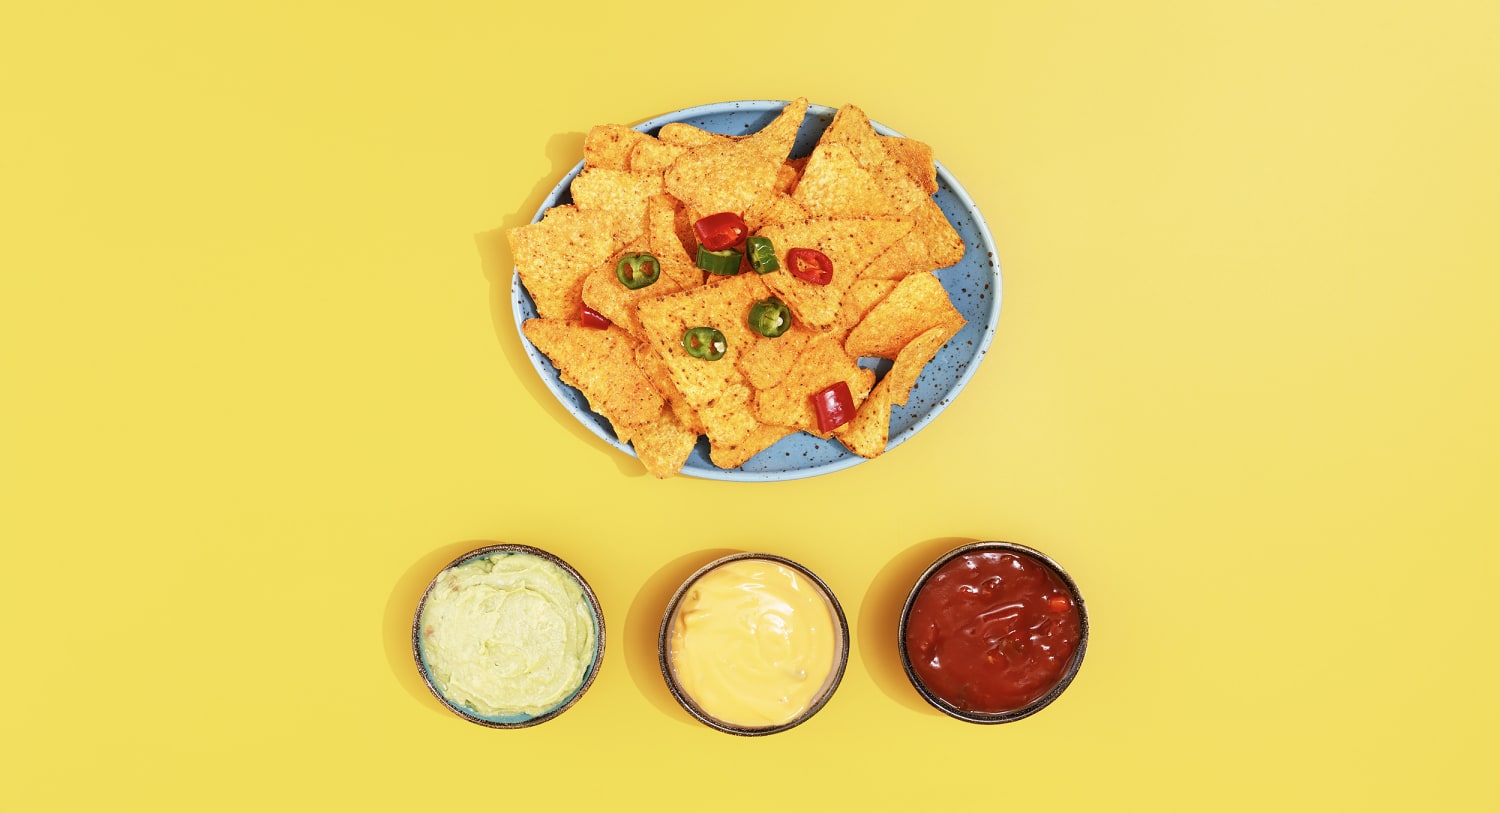 Celebrate National Chip and Dip Day with delicious deals